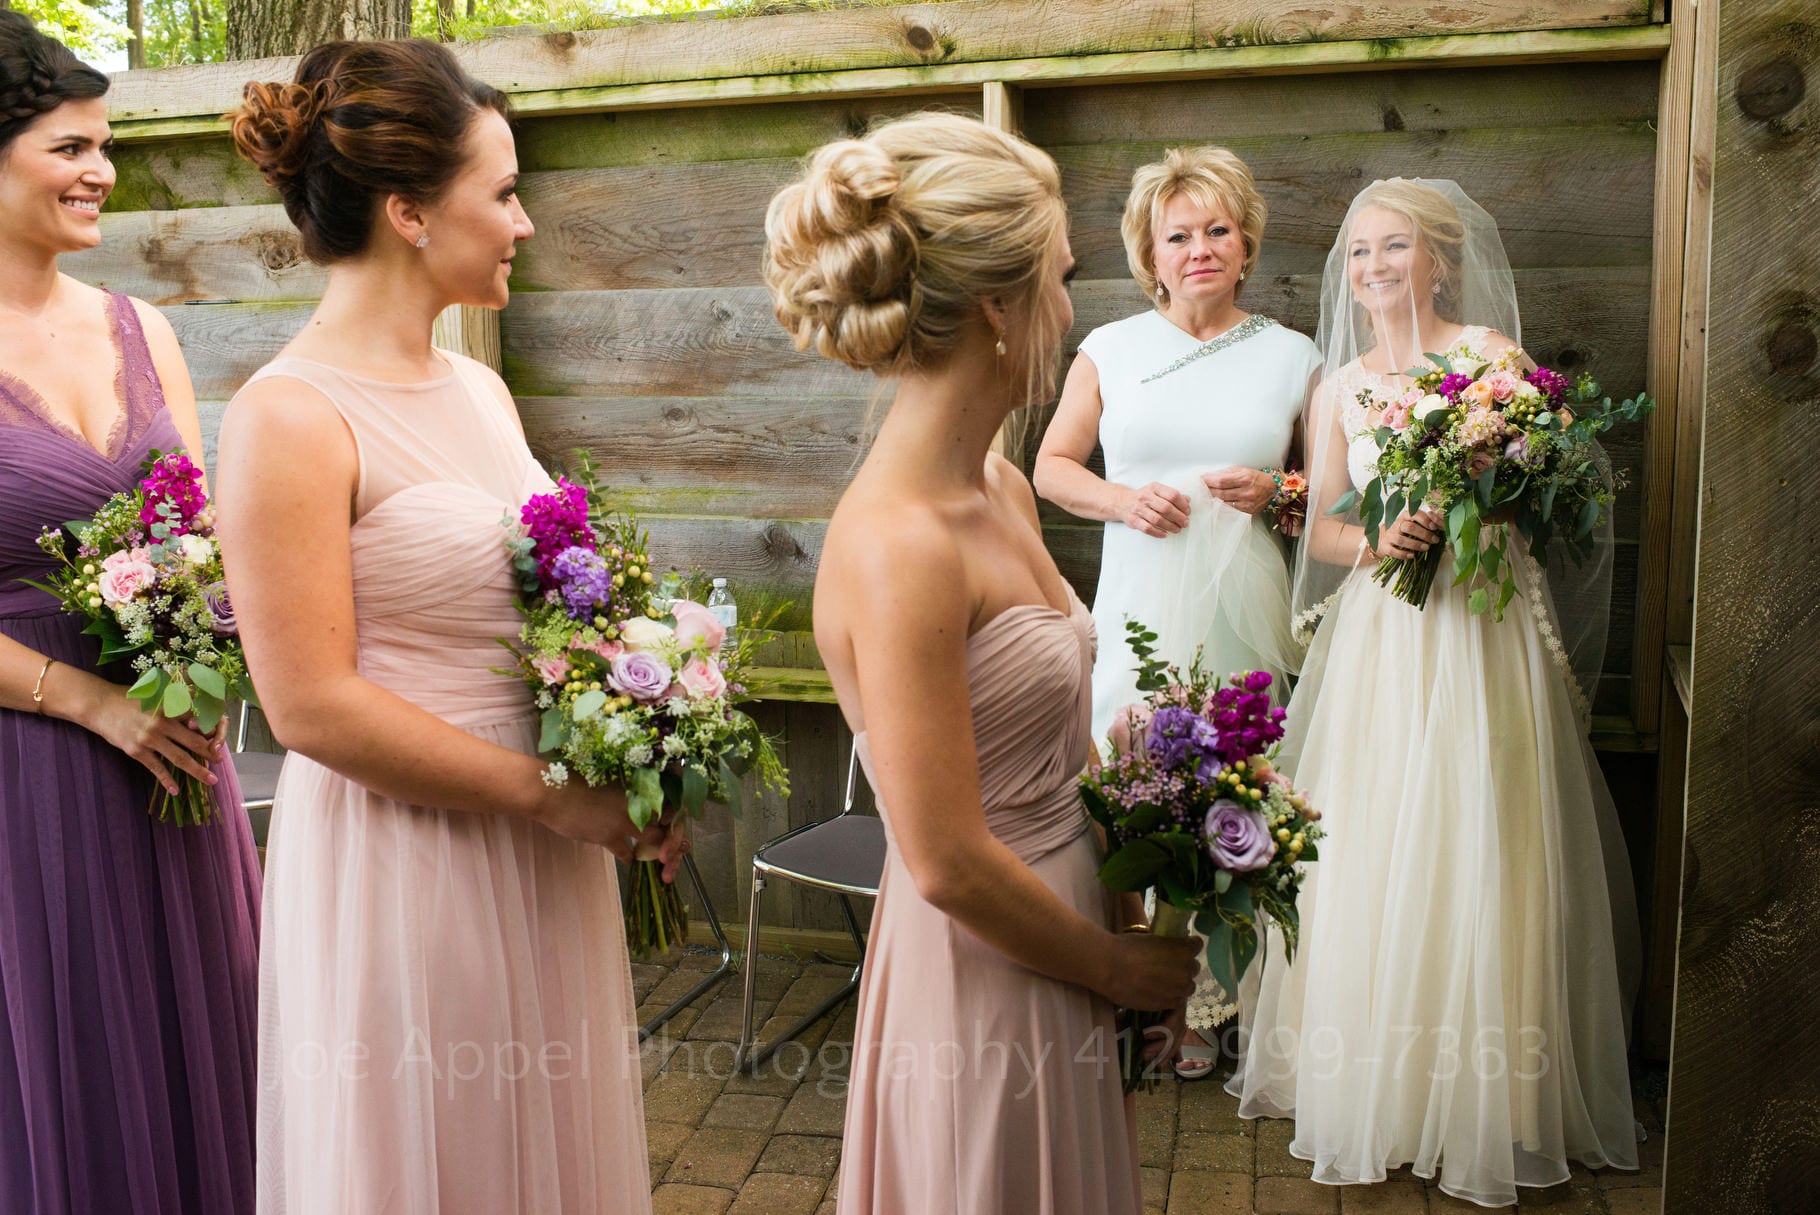 A bride stands next to her mother as she watches bridesmaids line up to walk down the aisle at the beginning of her wedding ceremony.